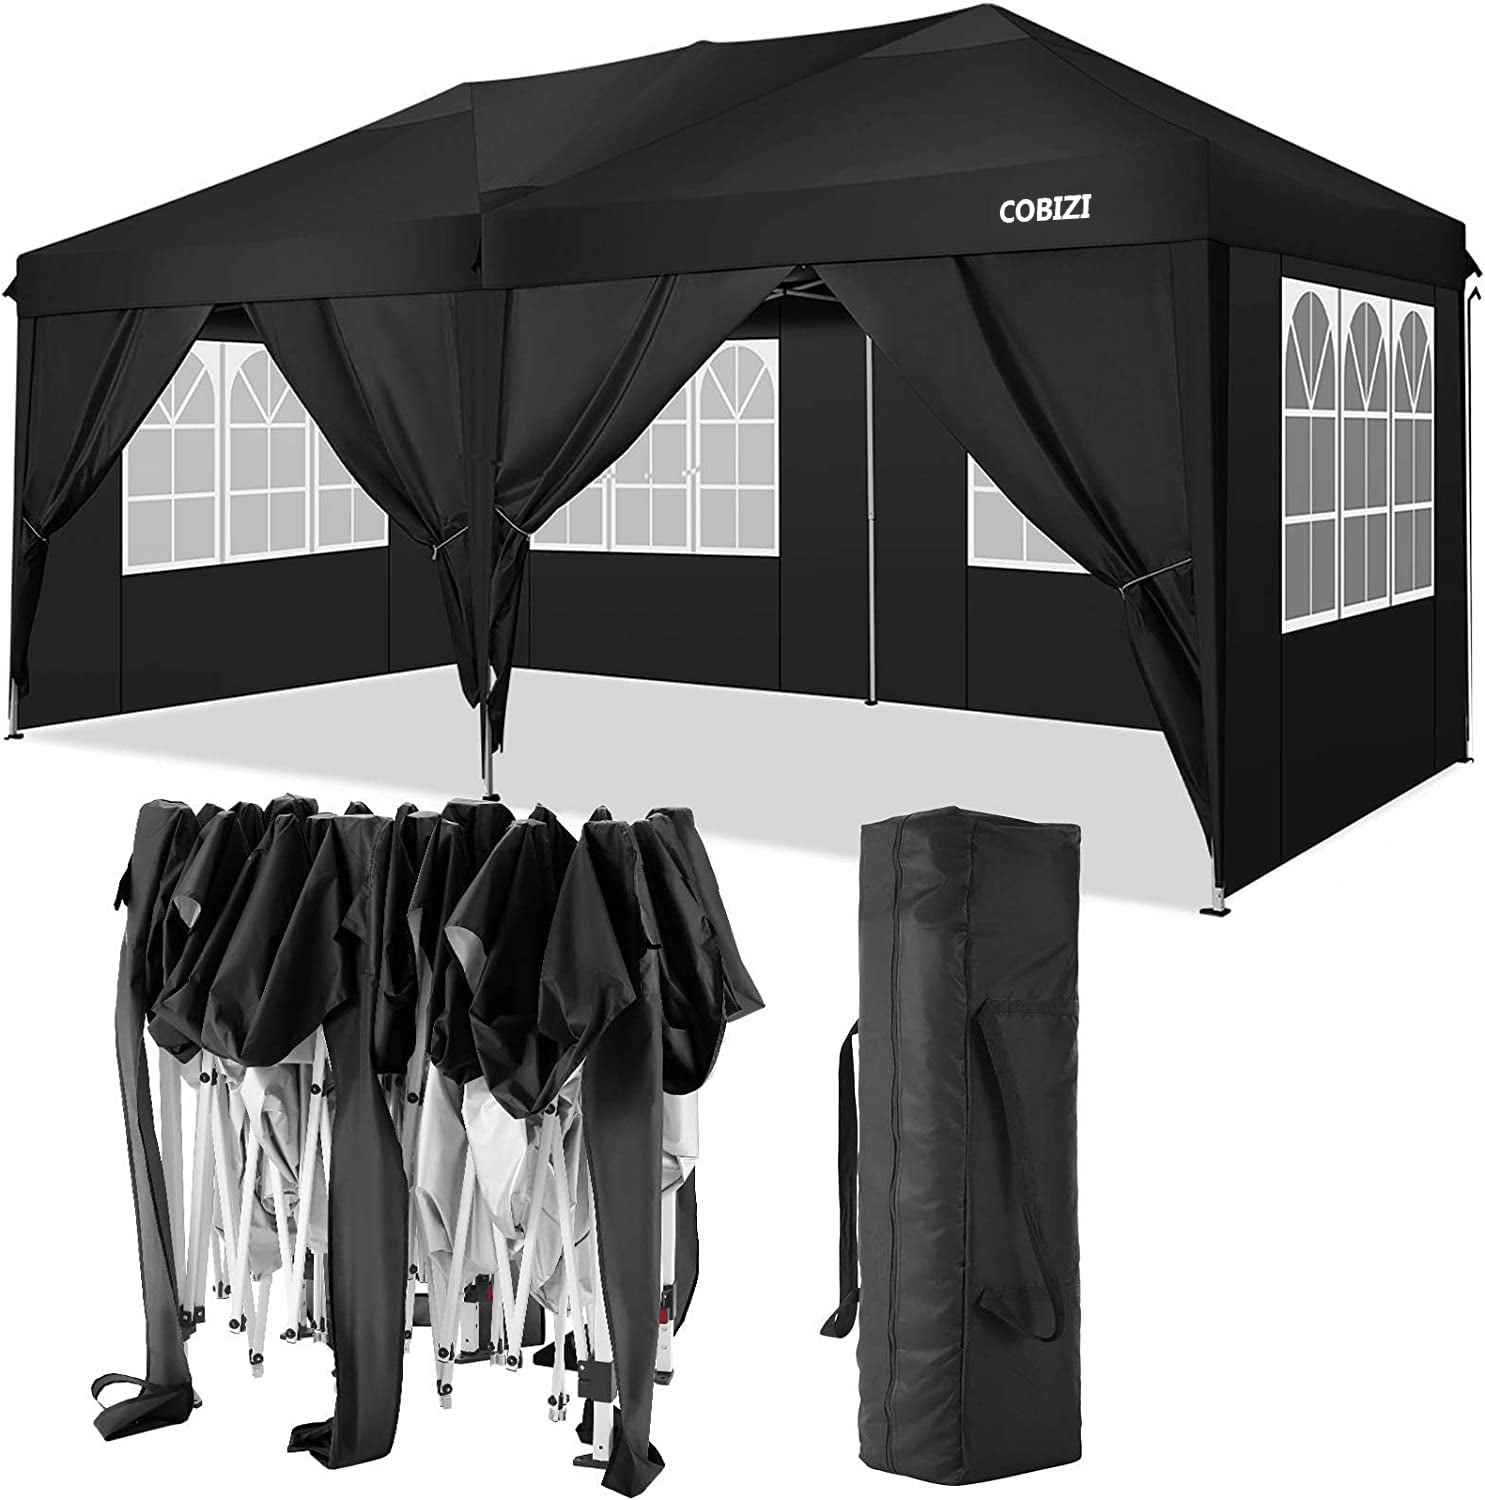 Canopy 10x20 Commercial Fair Shelter Car Shelter Wedding Pop Up Tent Heavy Duty 